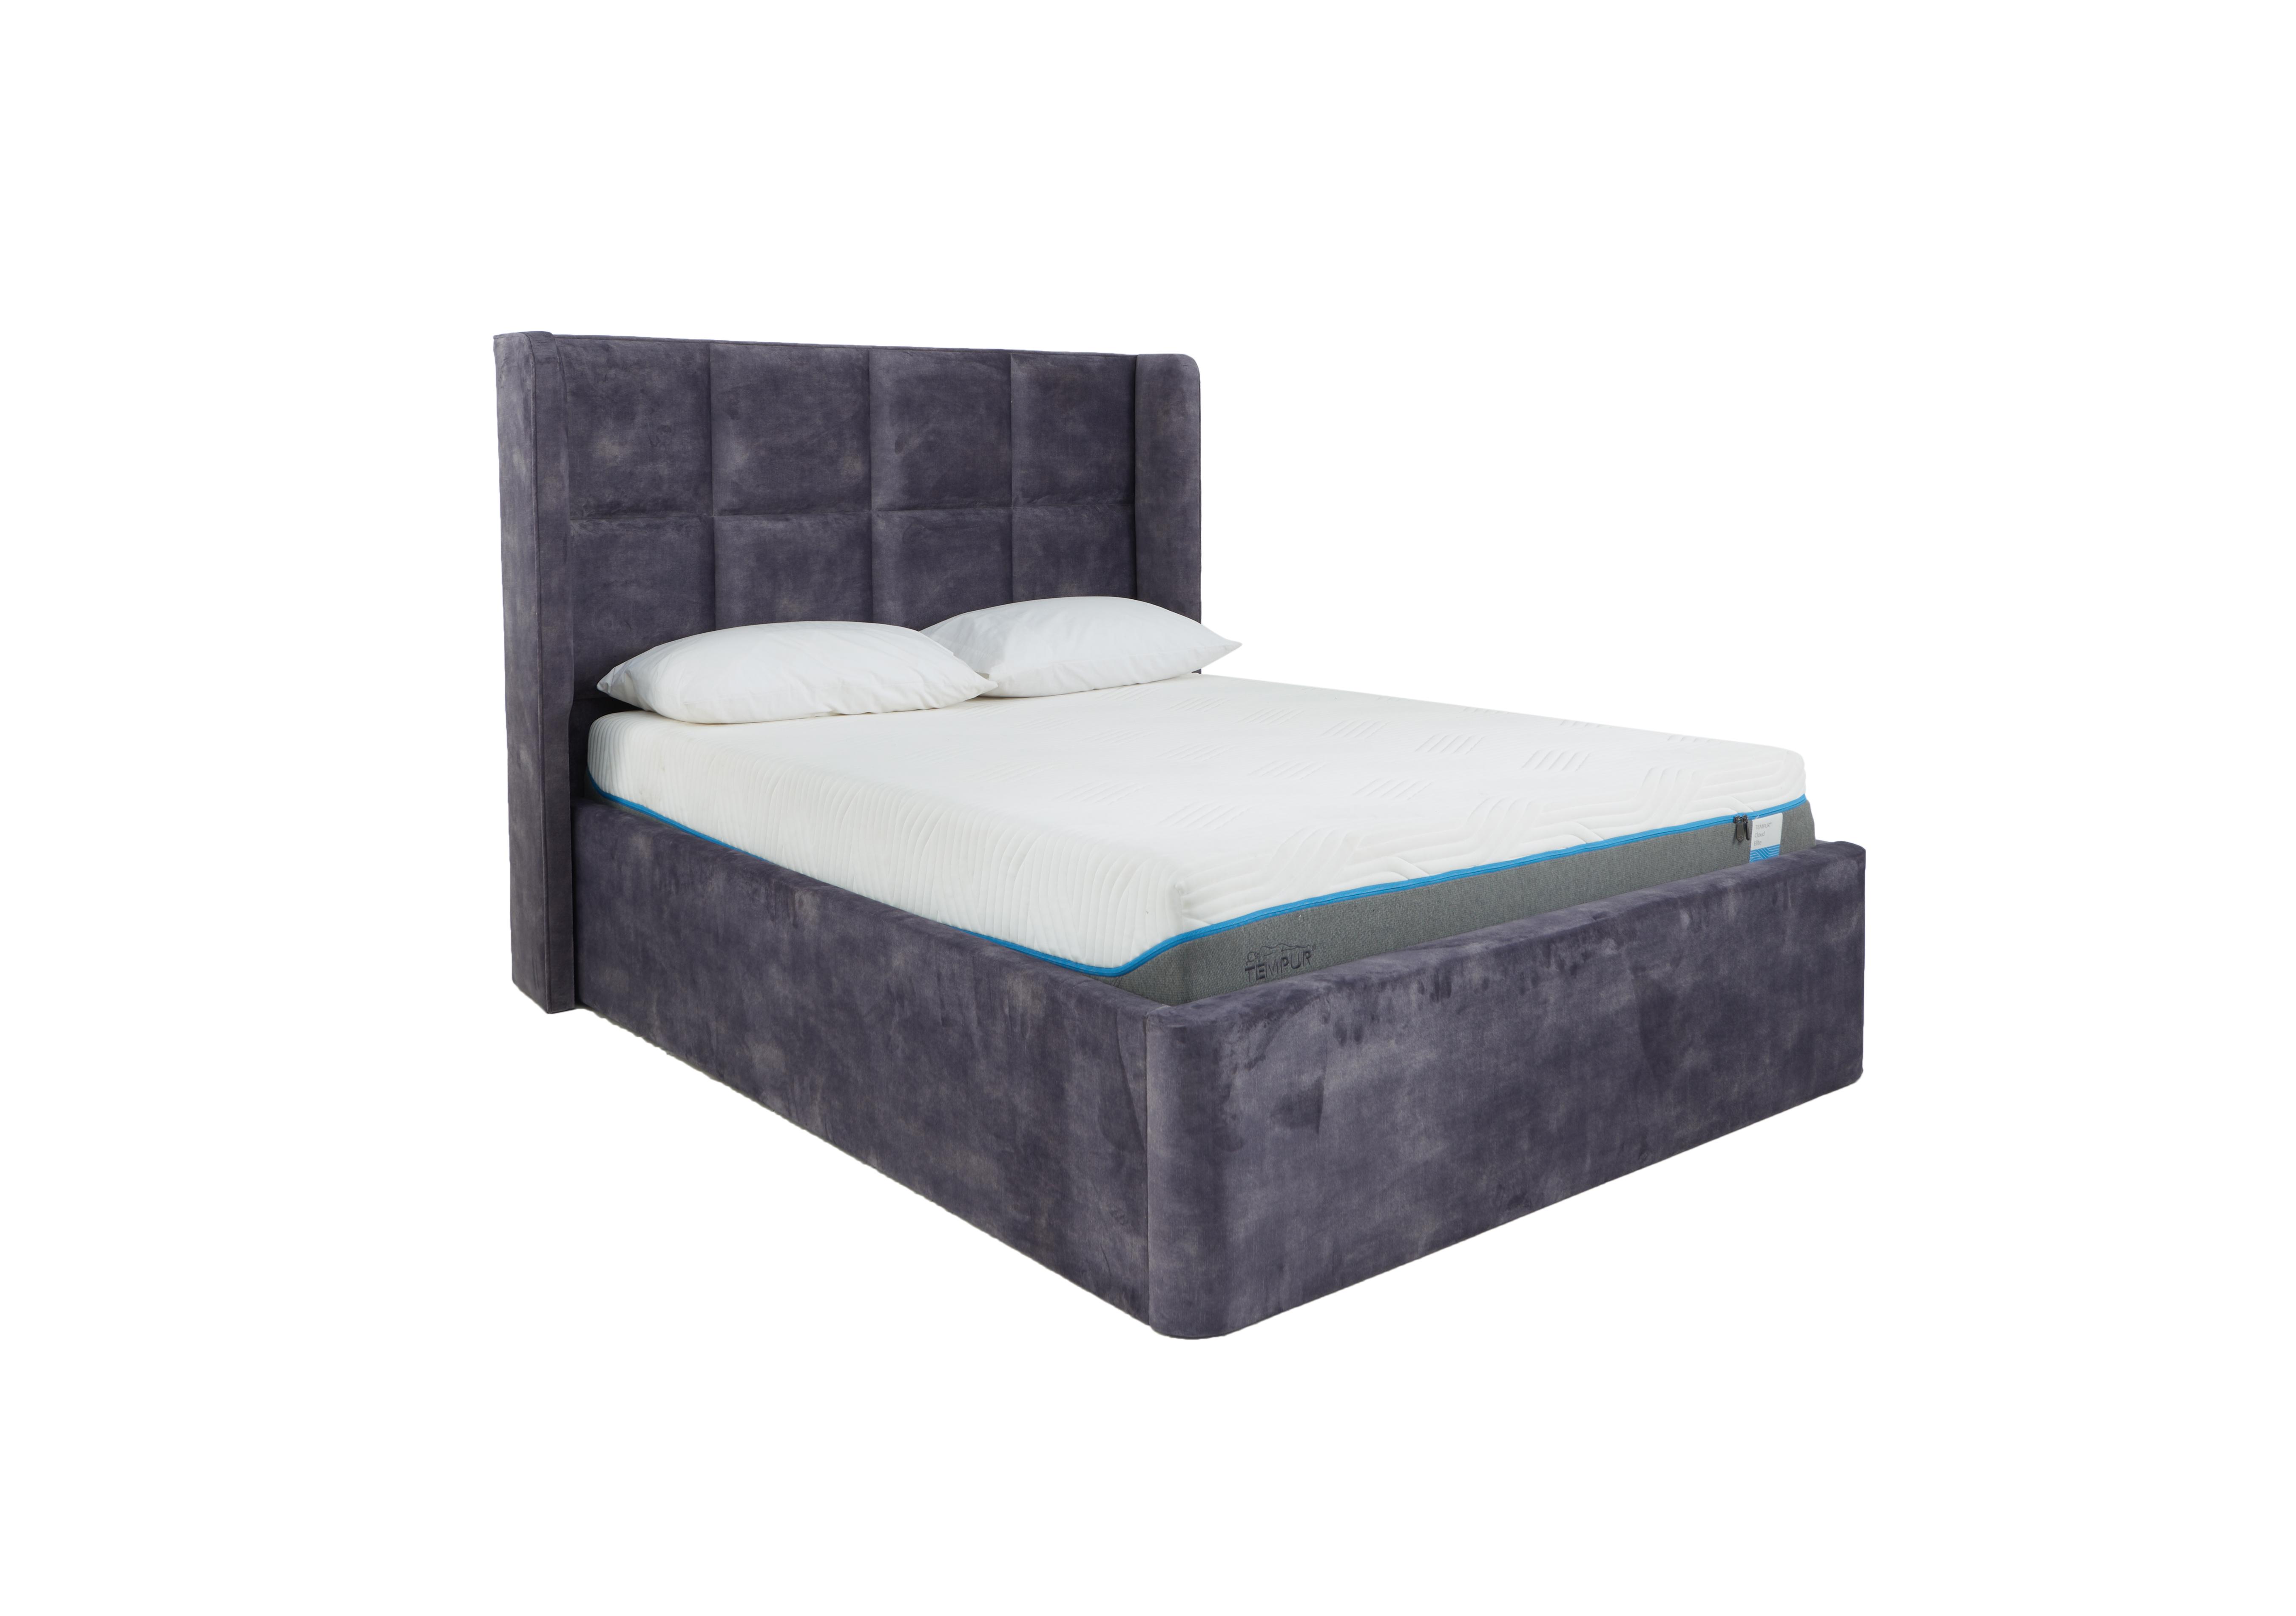 Shiva Bed Frame in Savannah Armour on Furniture Village